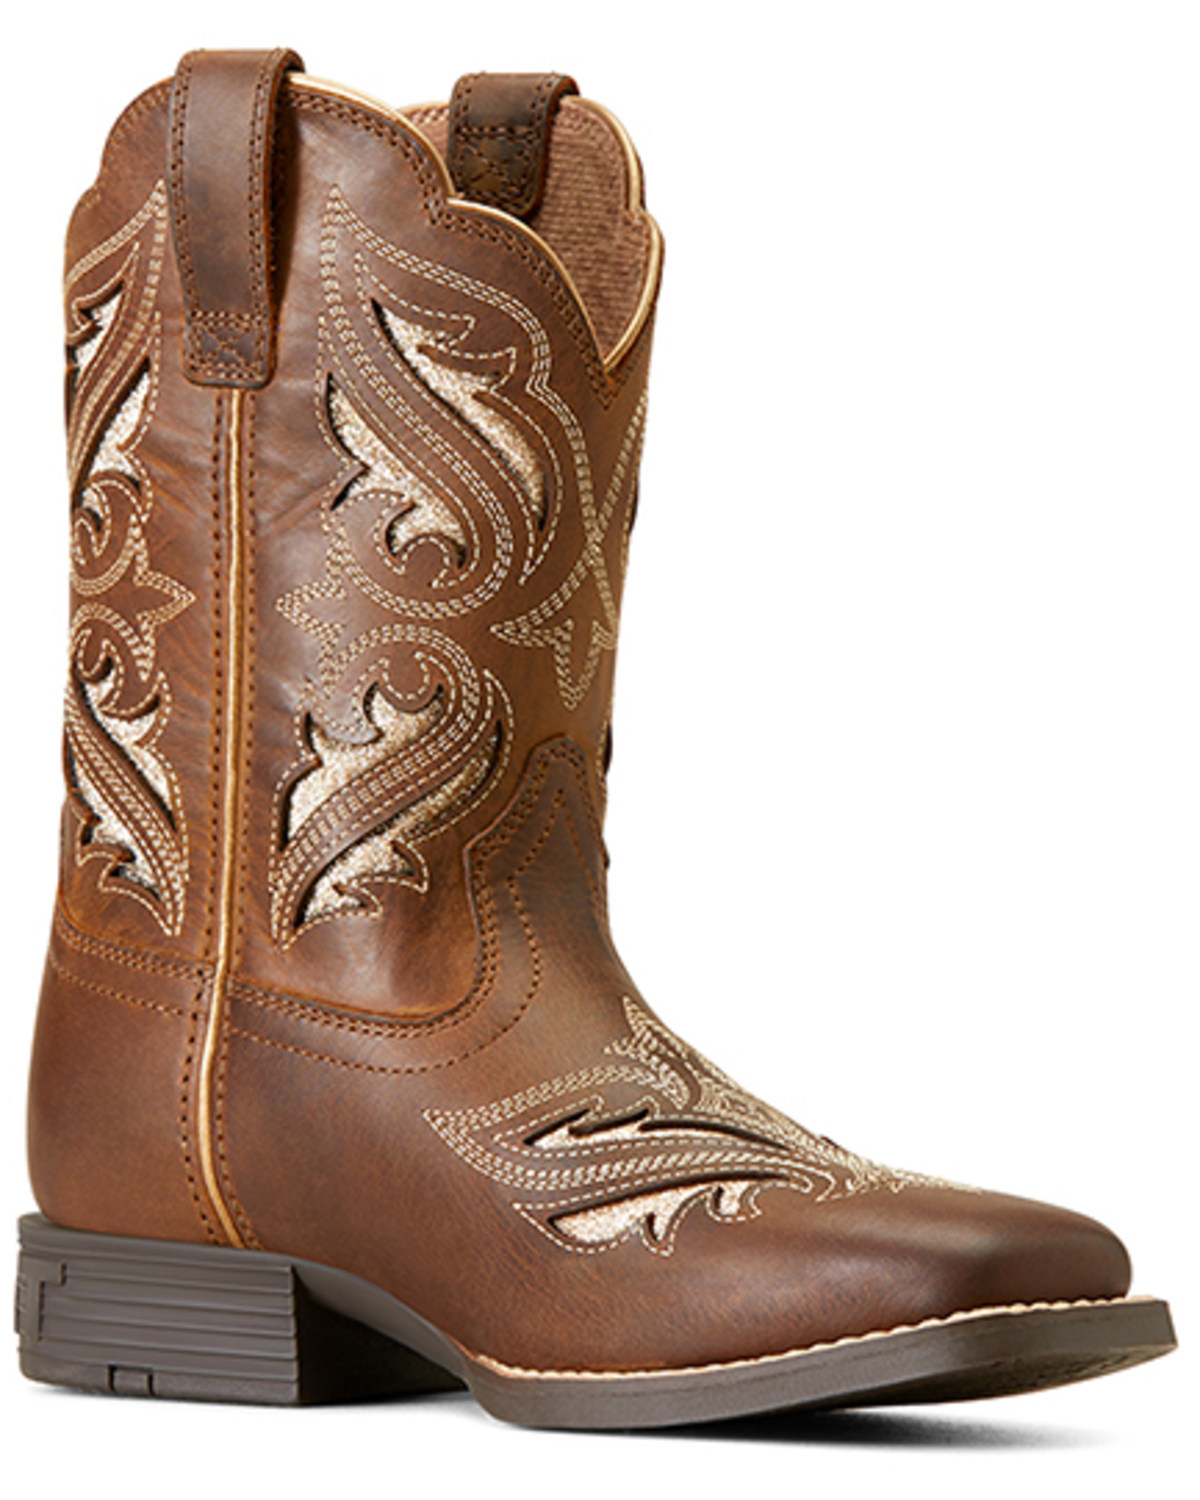 Ariat Girls' Round Up Bliss Western Boots - Broad Square Toe